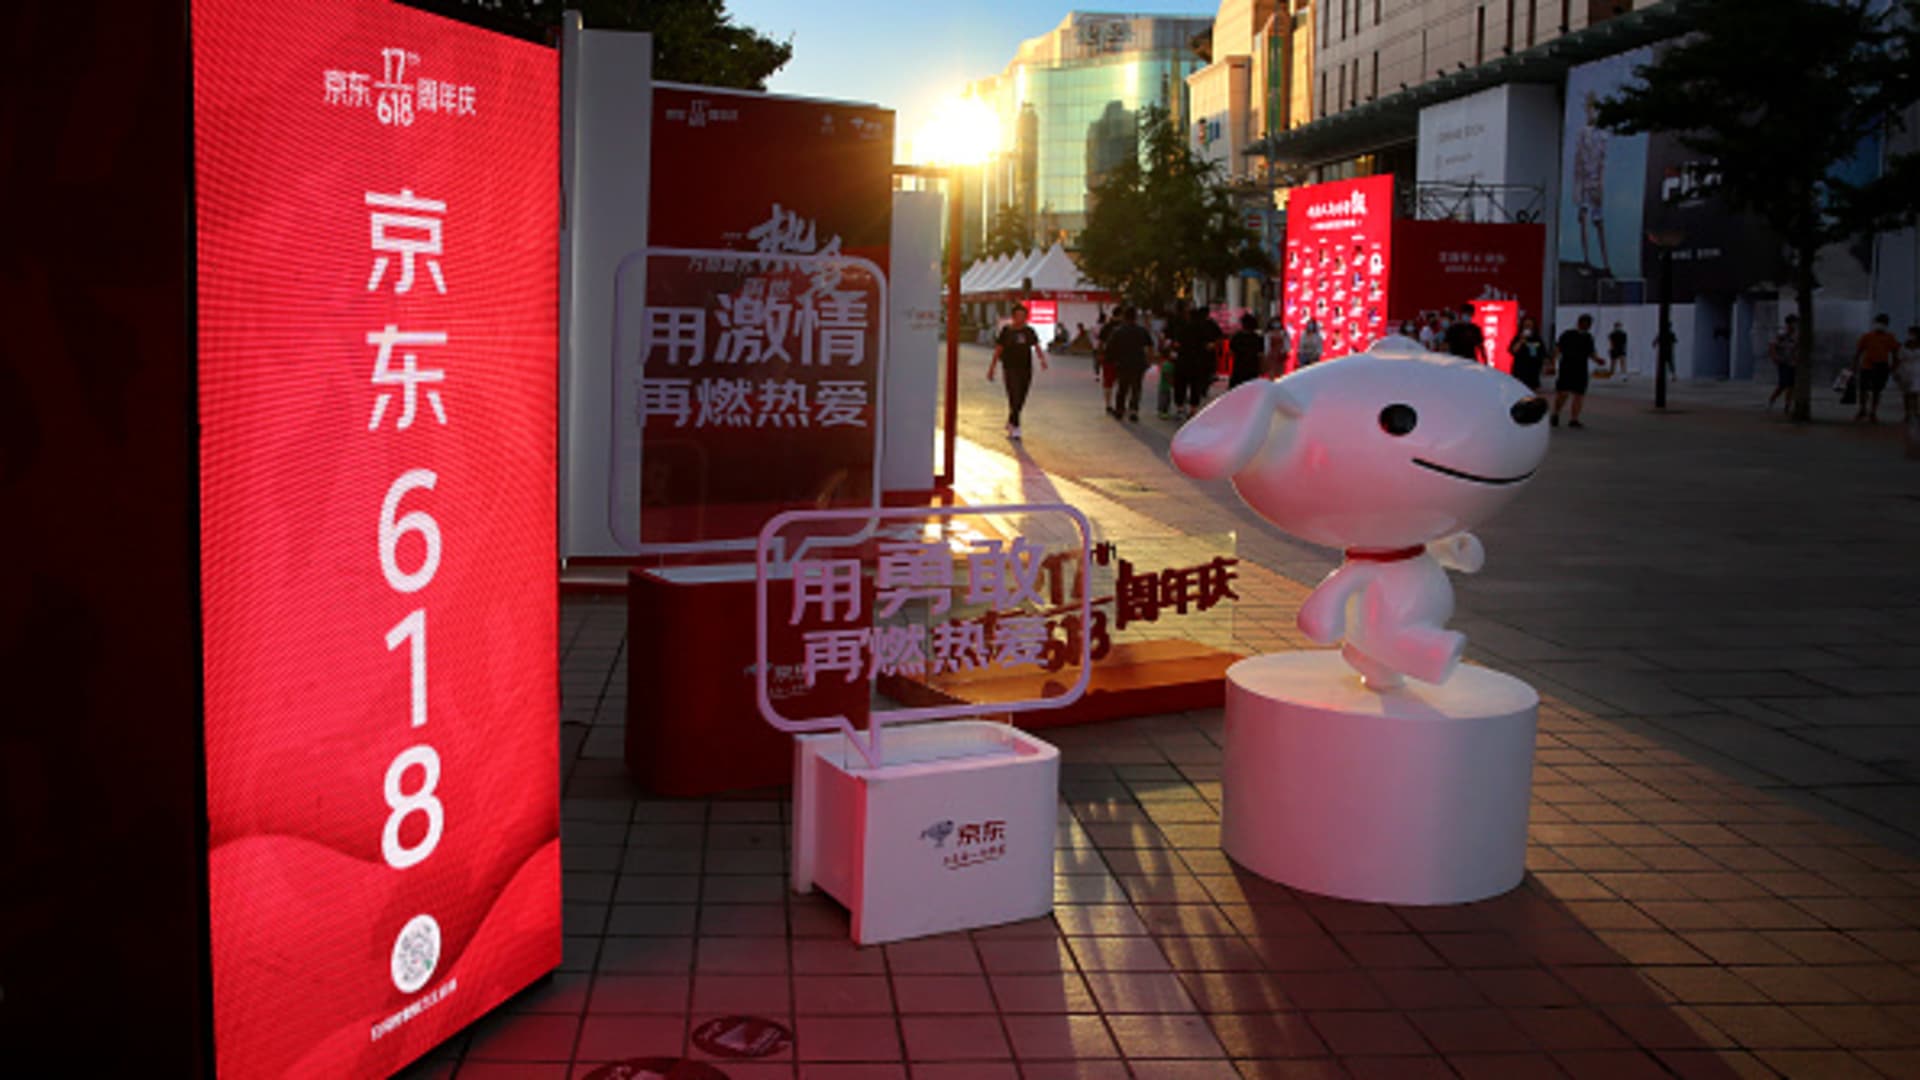 China’s tech regulation is getting more ‘rational,’ says top executive of JD.com